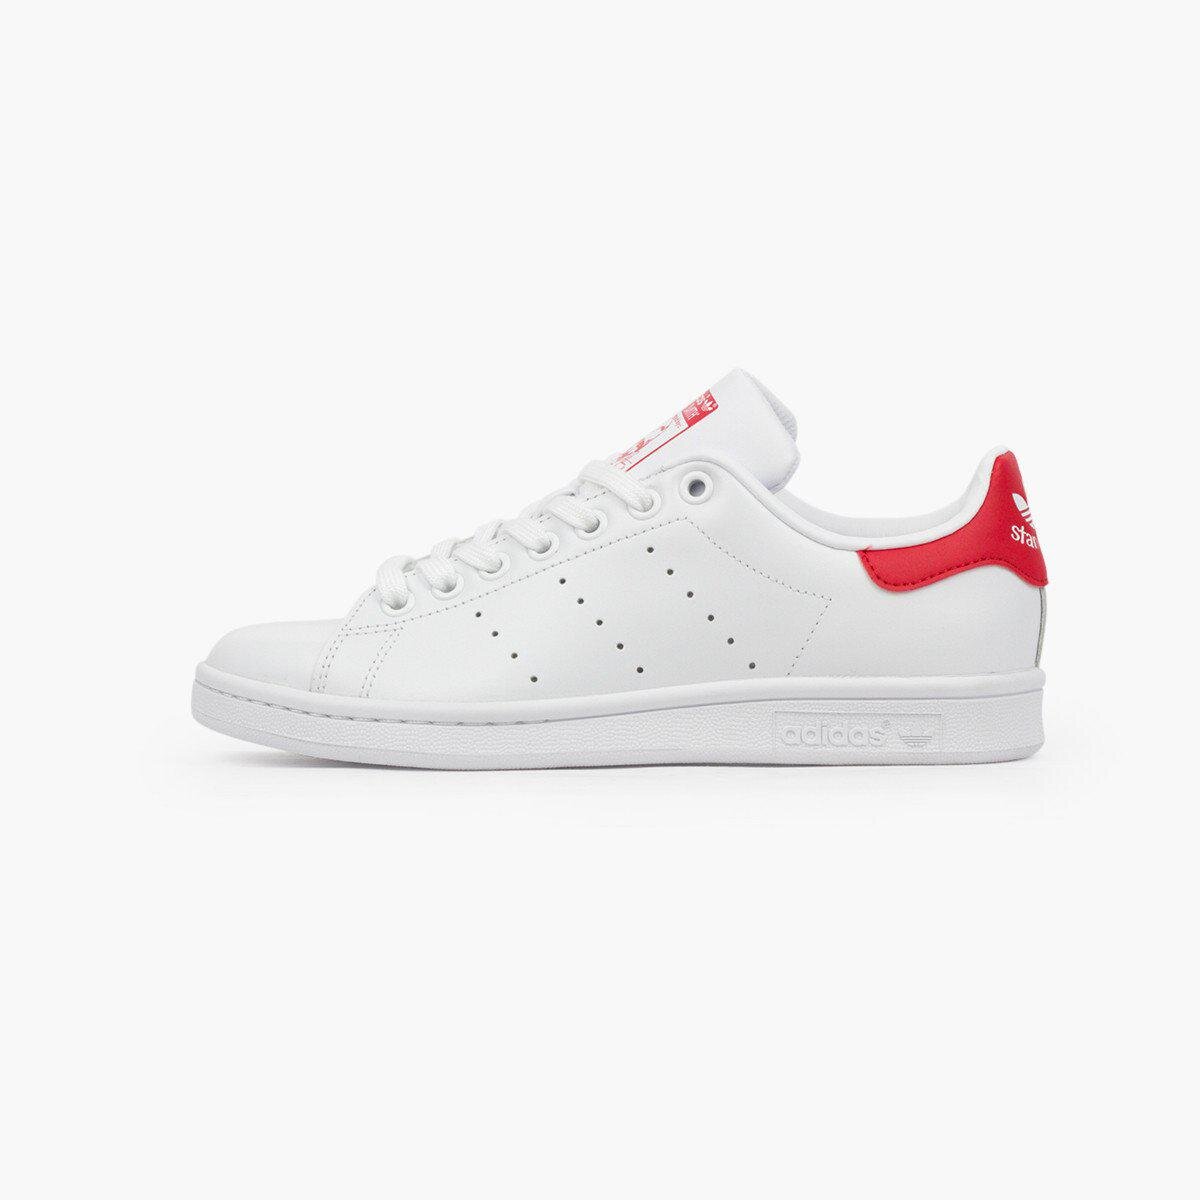 Adidas Stan Smith Shoes in White:Red.jpg